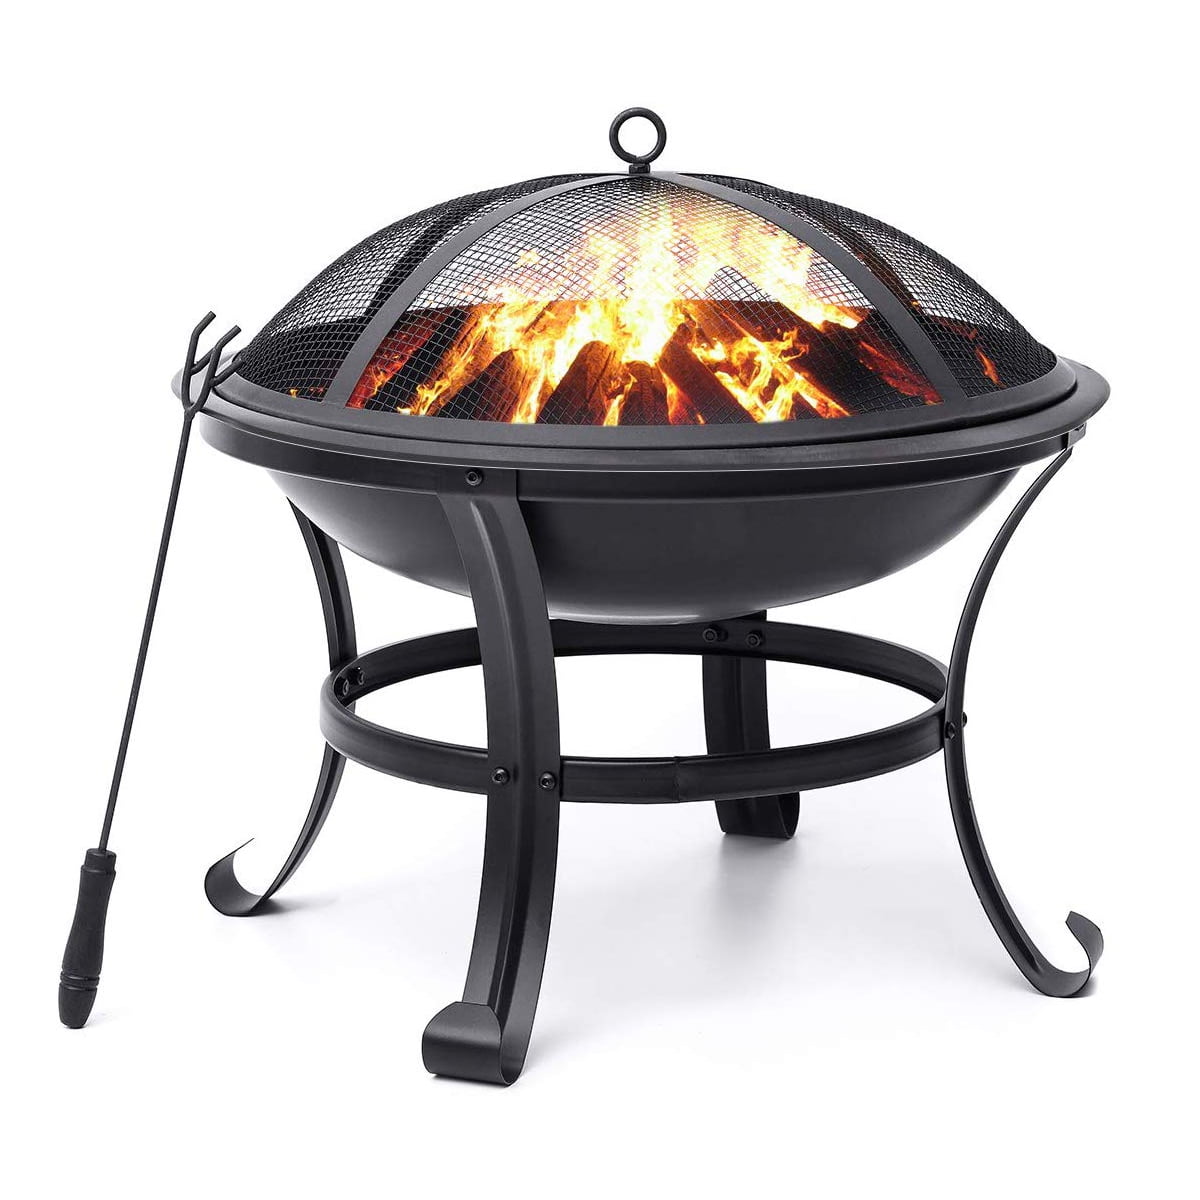 KingSo Outdoor Patio 22inch Round Steel Wood Burning Fire Pit w/ Screen Cover, Log Grate, Poker